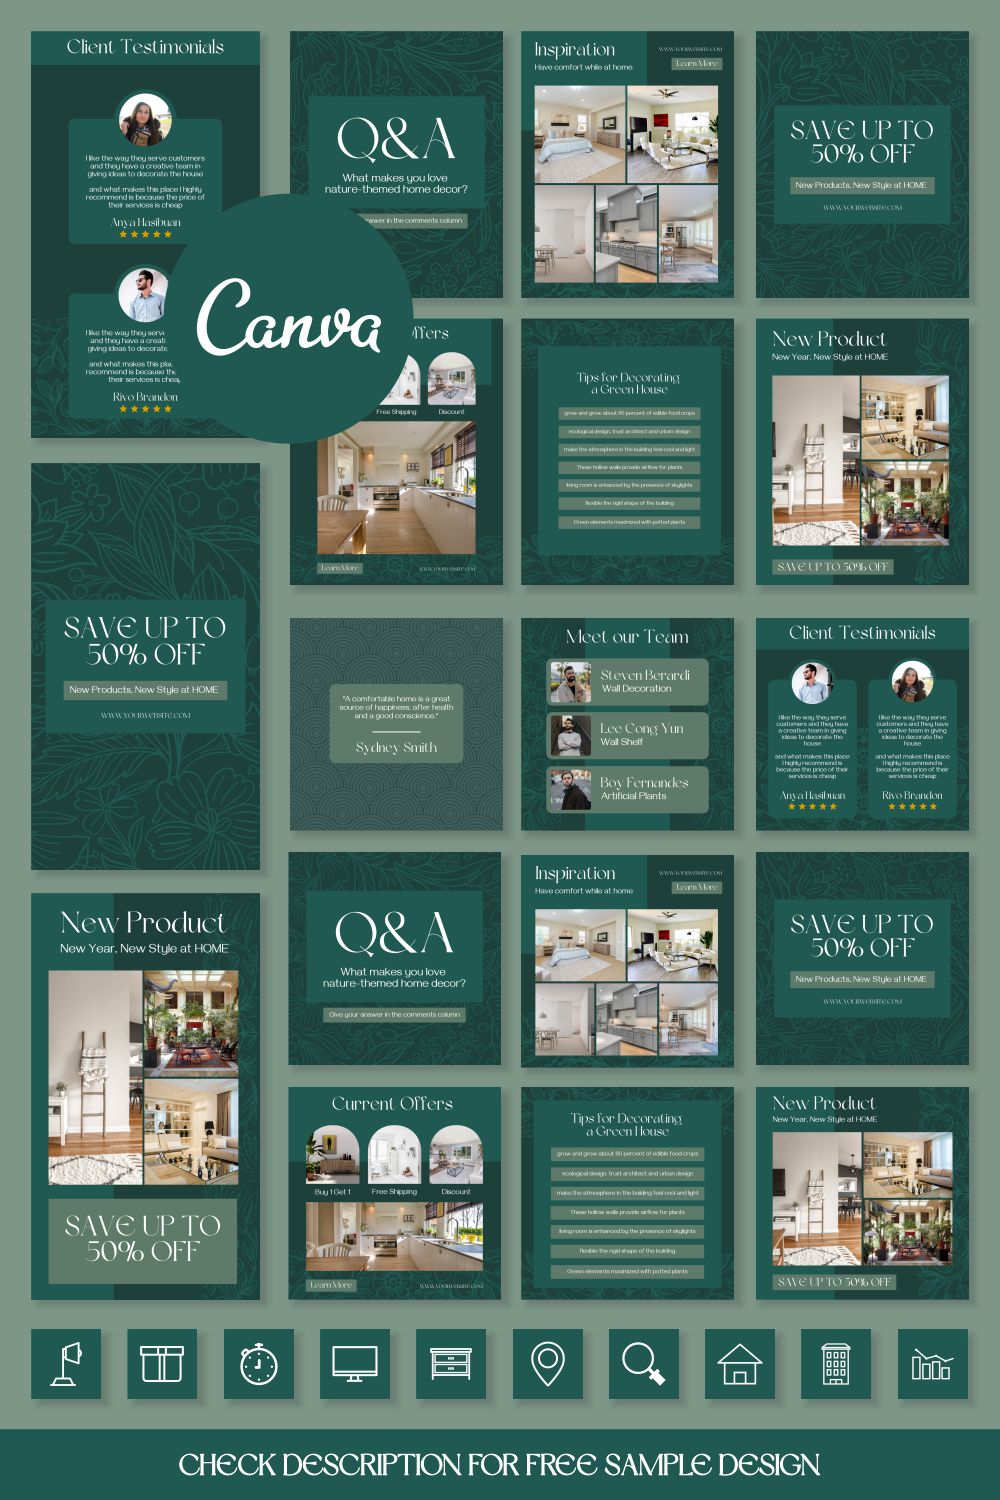 Home Decor Instagram Posts And Stories Canva Template Pinterest Image.